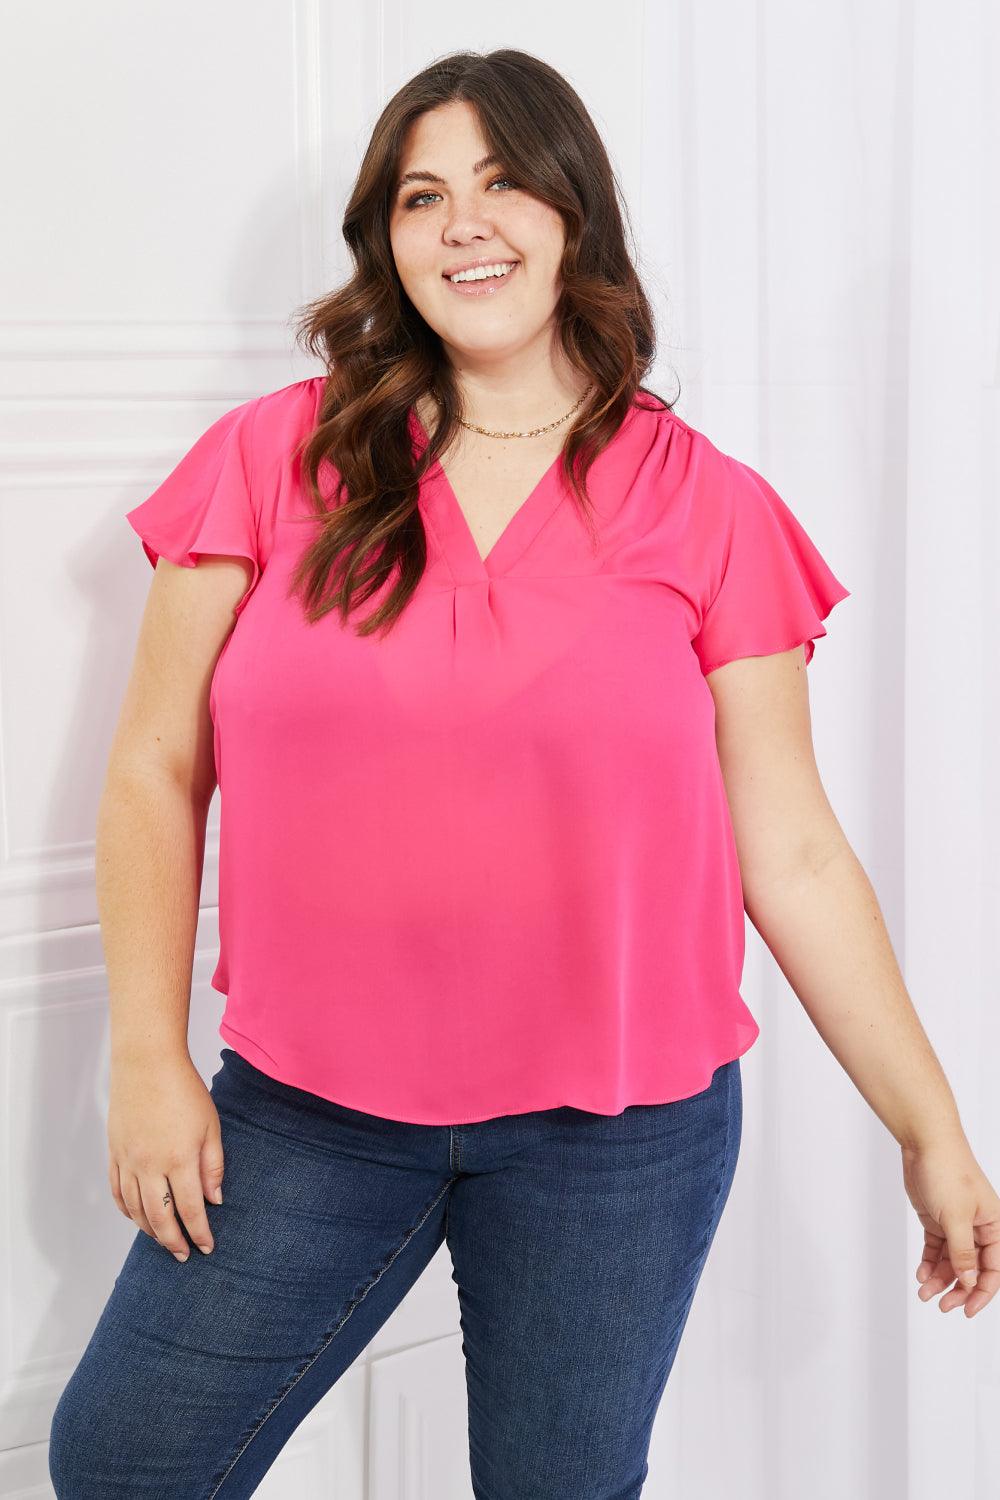 Sew In Love Just For You Full Size Short Ruffled Sleeve Length Top in Hot Pink - Immenzive